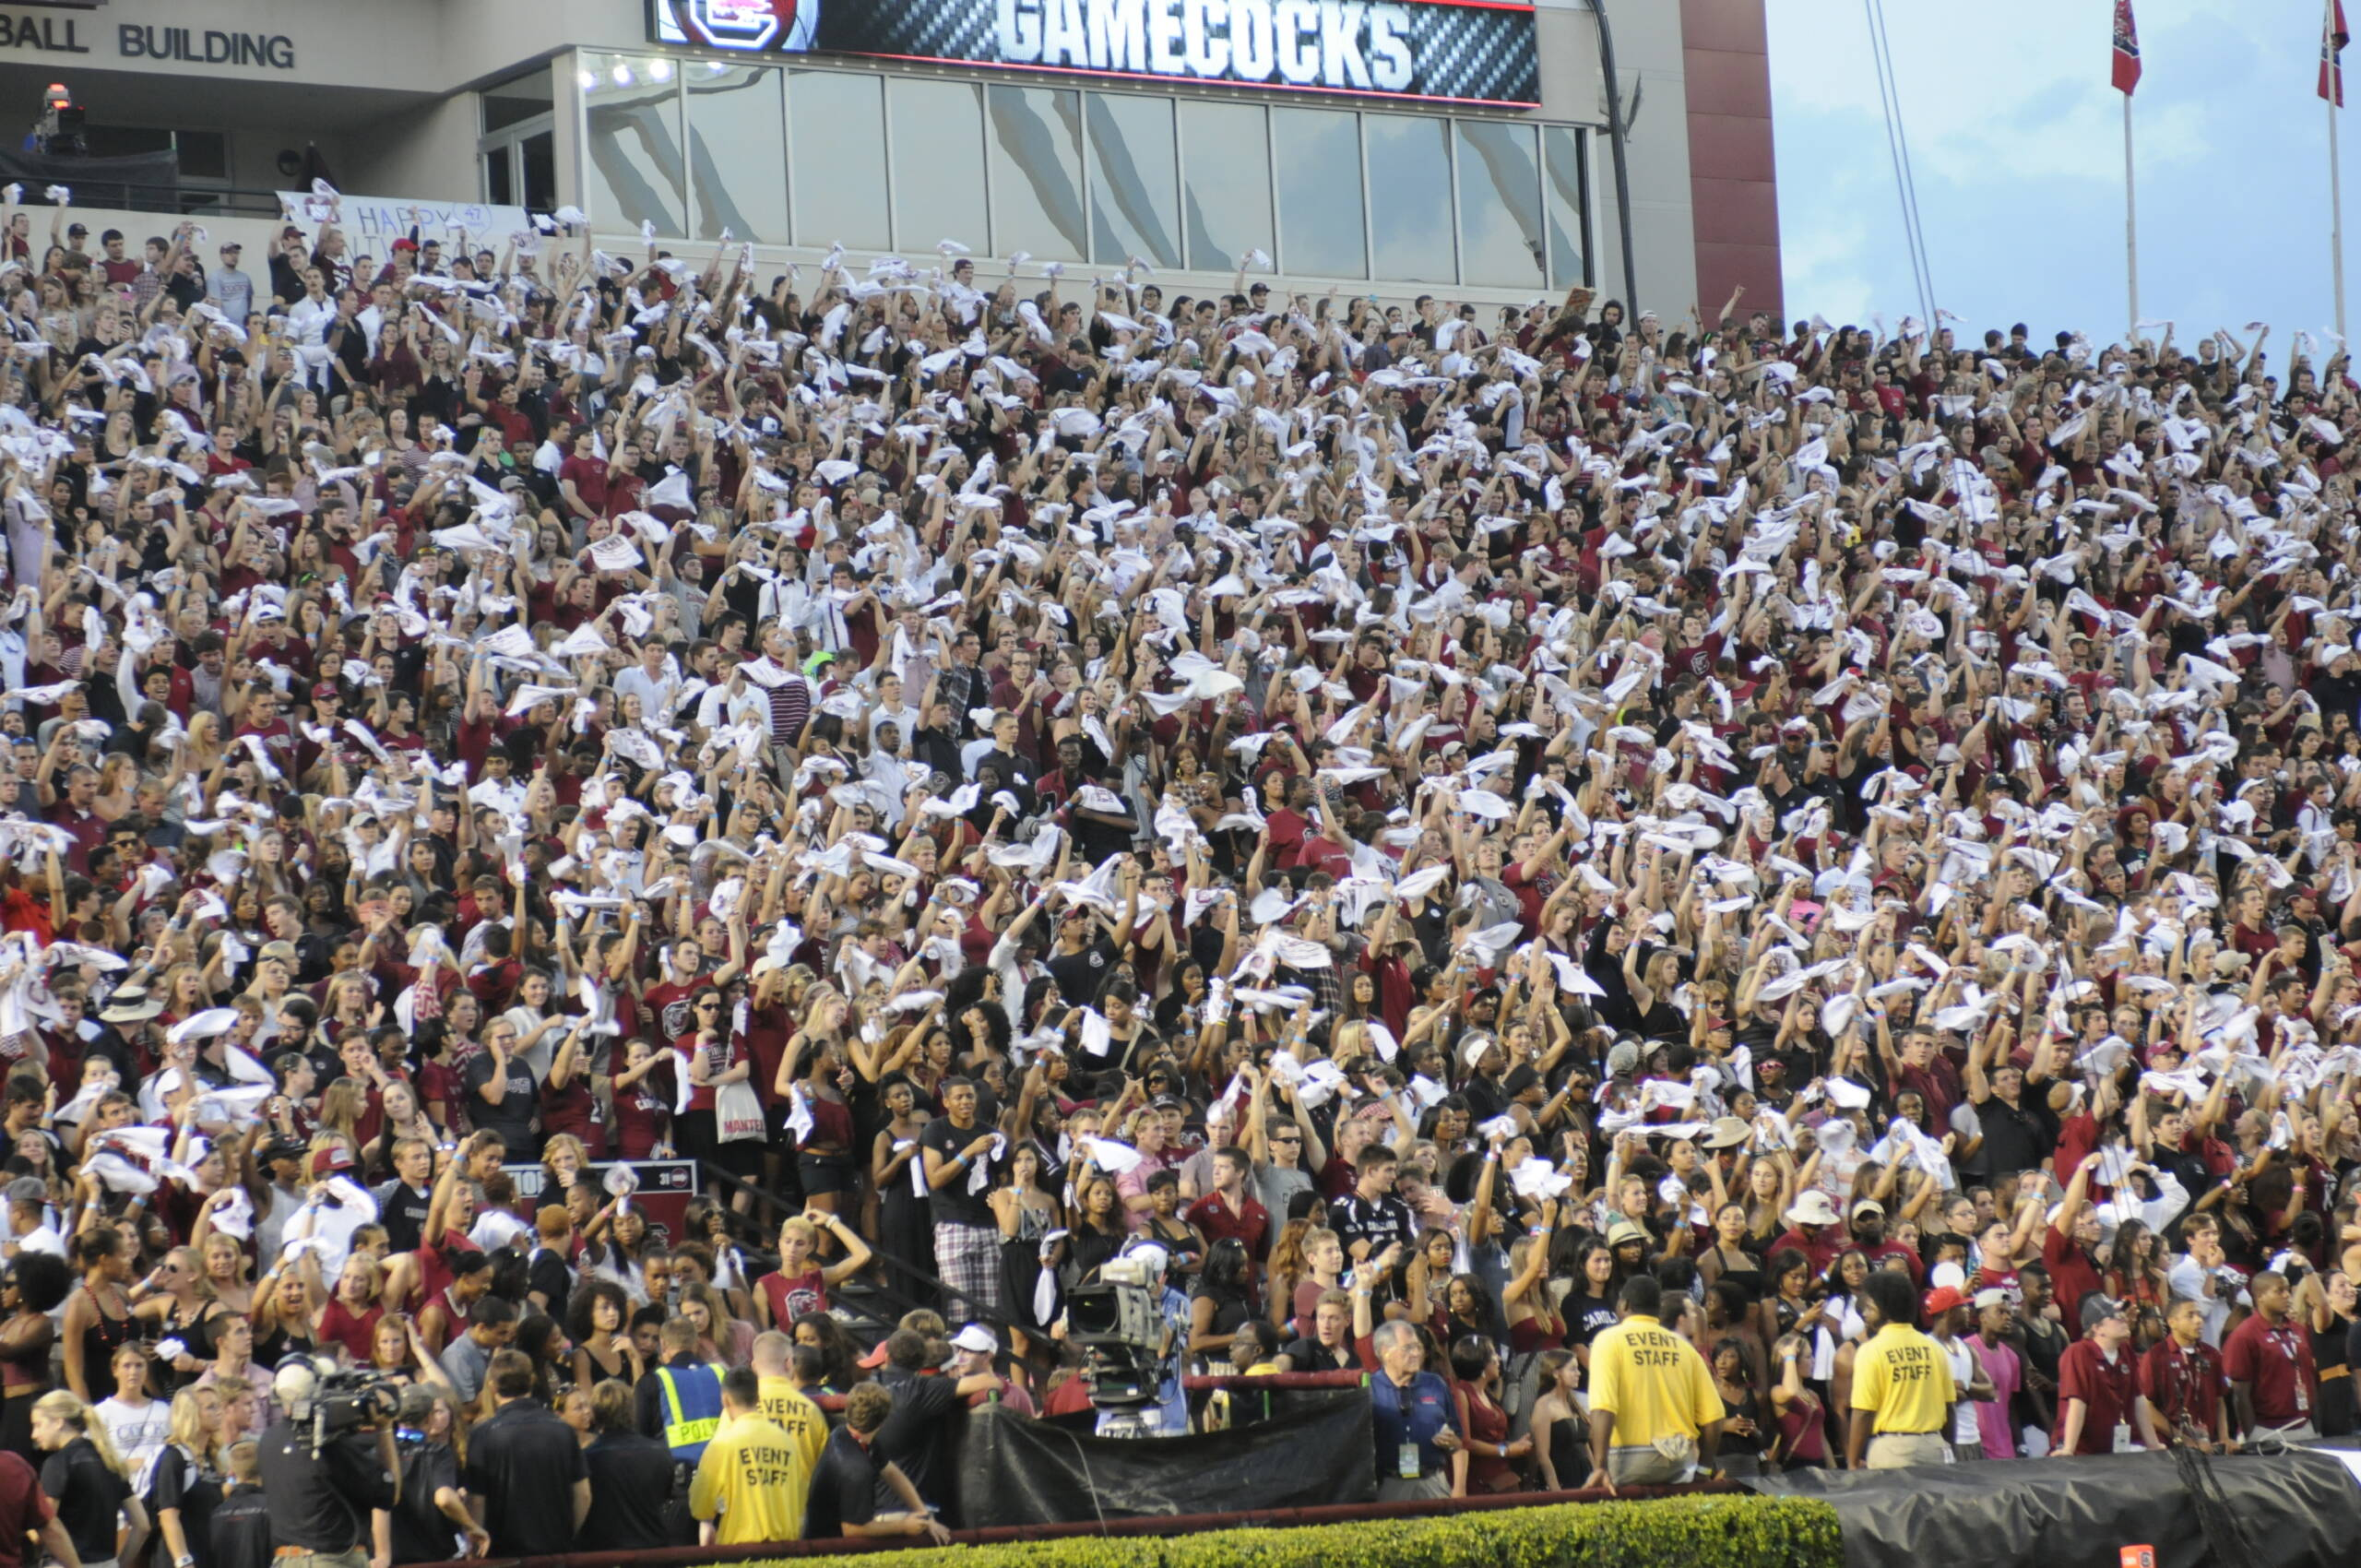 South Carolina Offers Discount to Teachers for Football Game